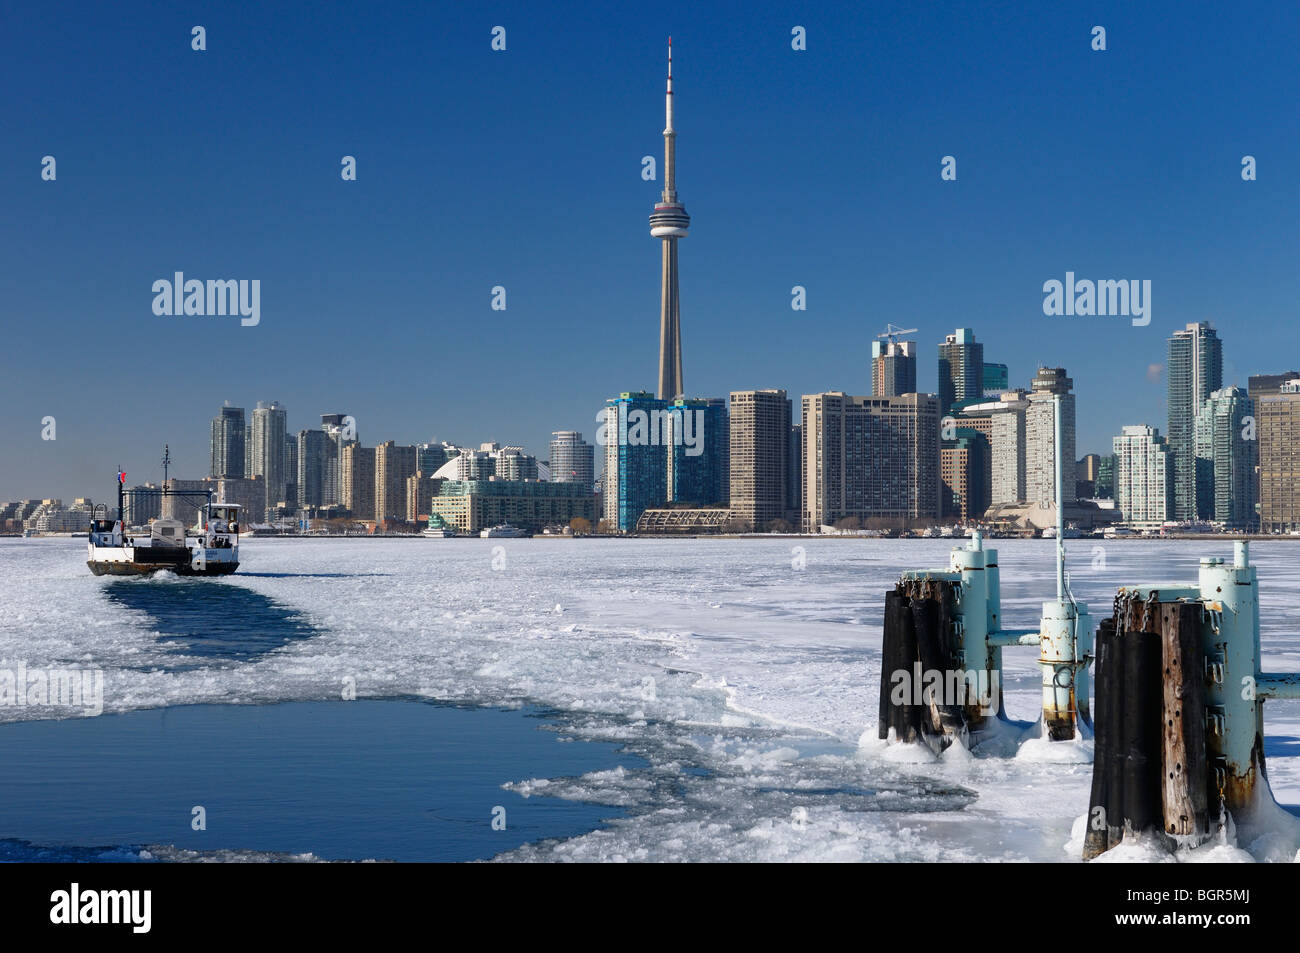 Wards Island Ferry returning to Toronto in winter keeping a channel open on an ice covered Lake Ontario Stock Photo